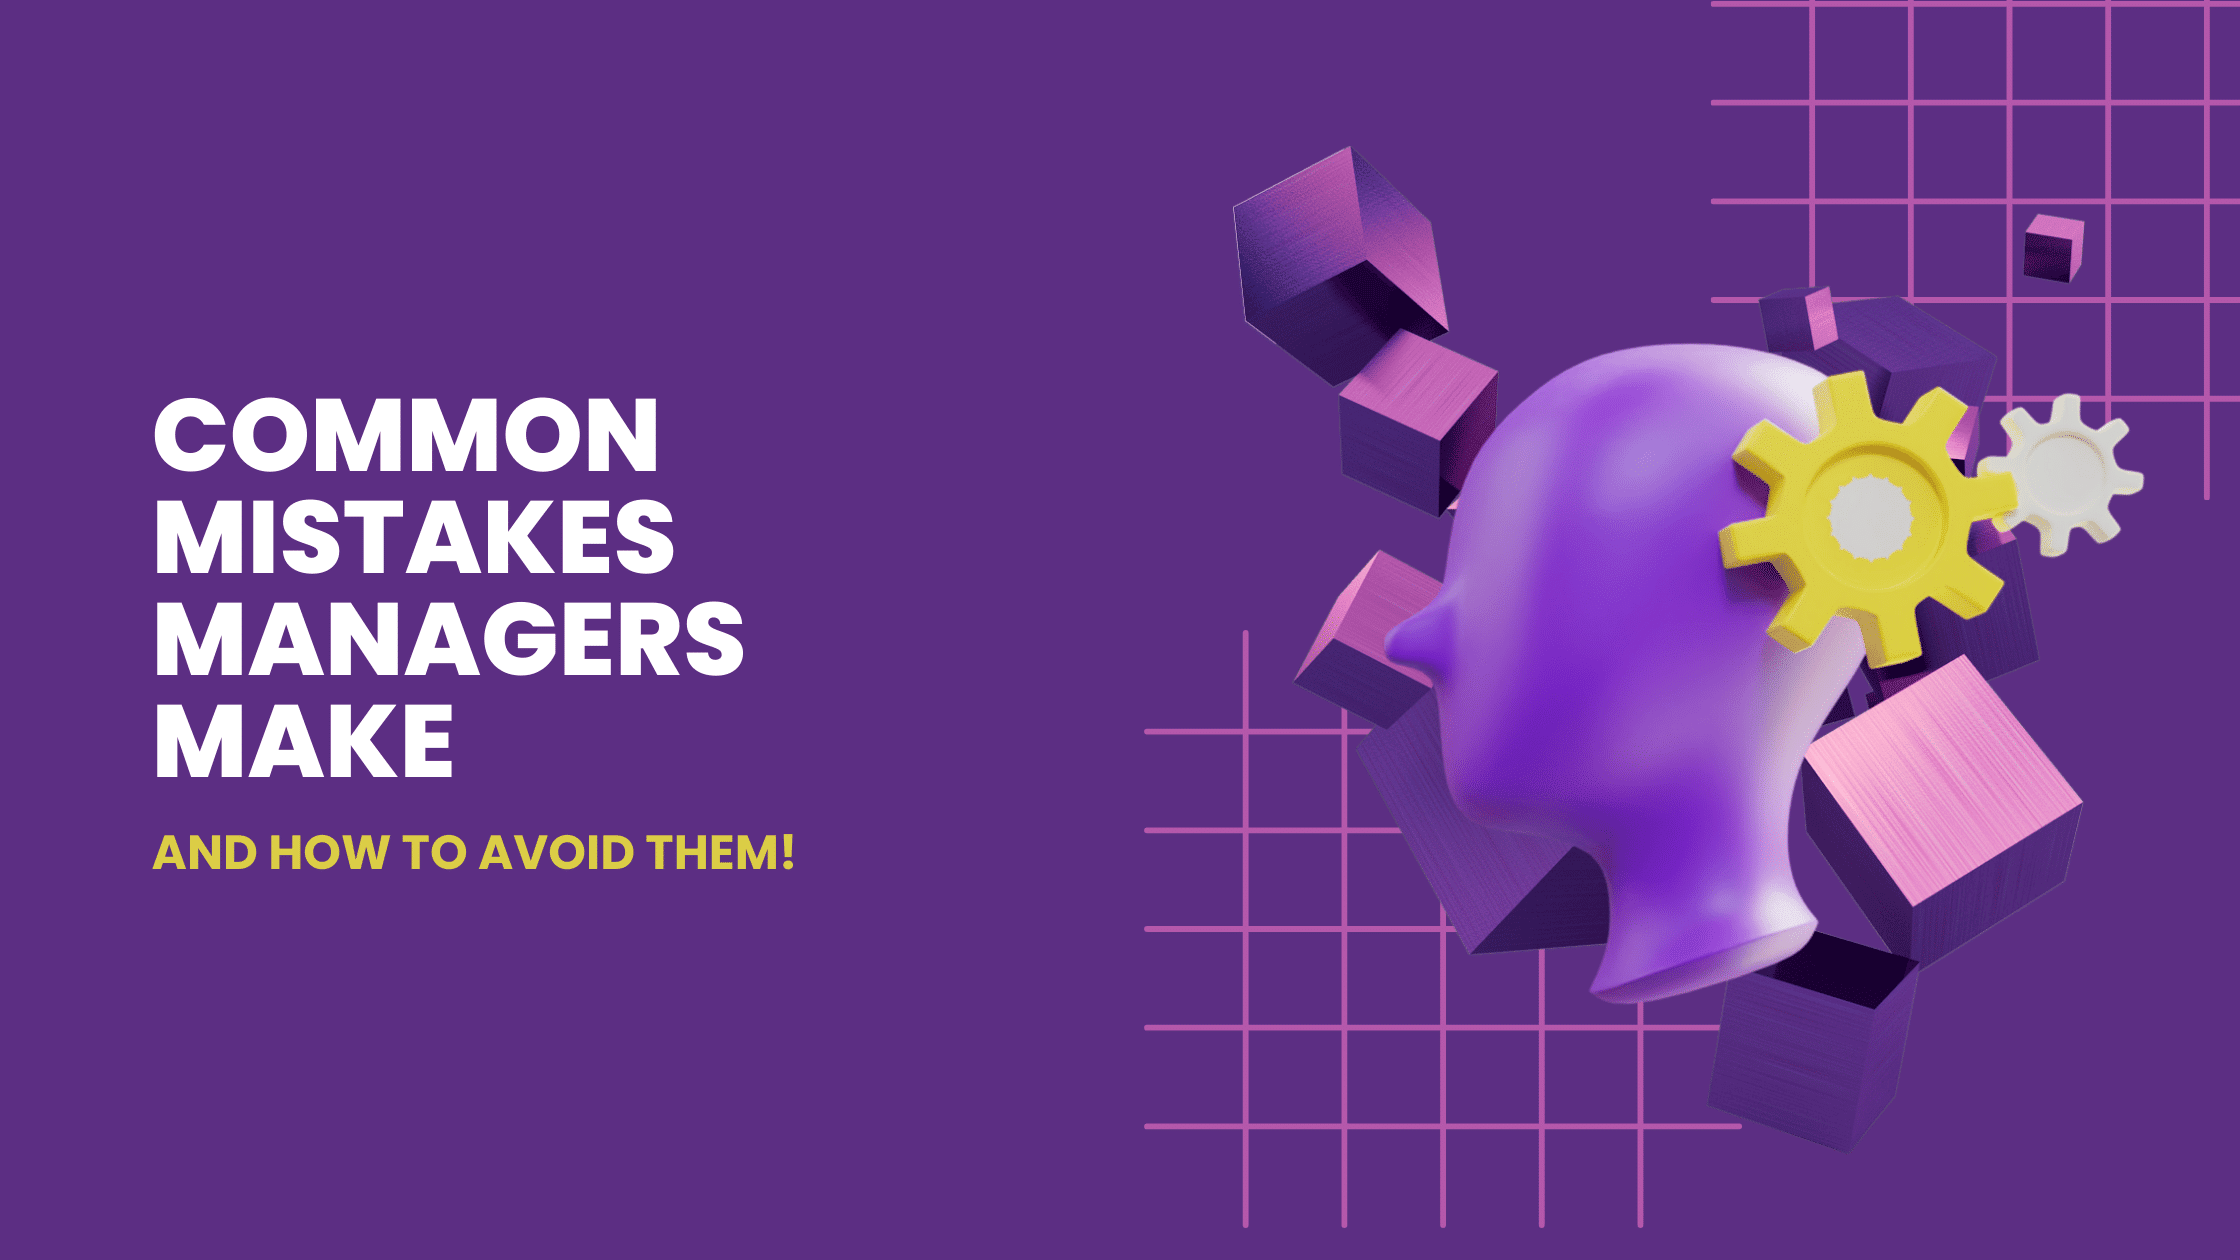 9 Common Mistakes Managers Make and How to Avoid Them